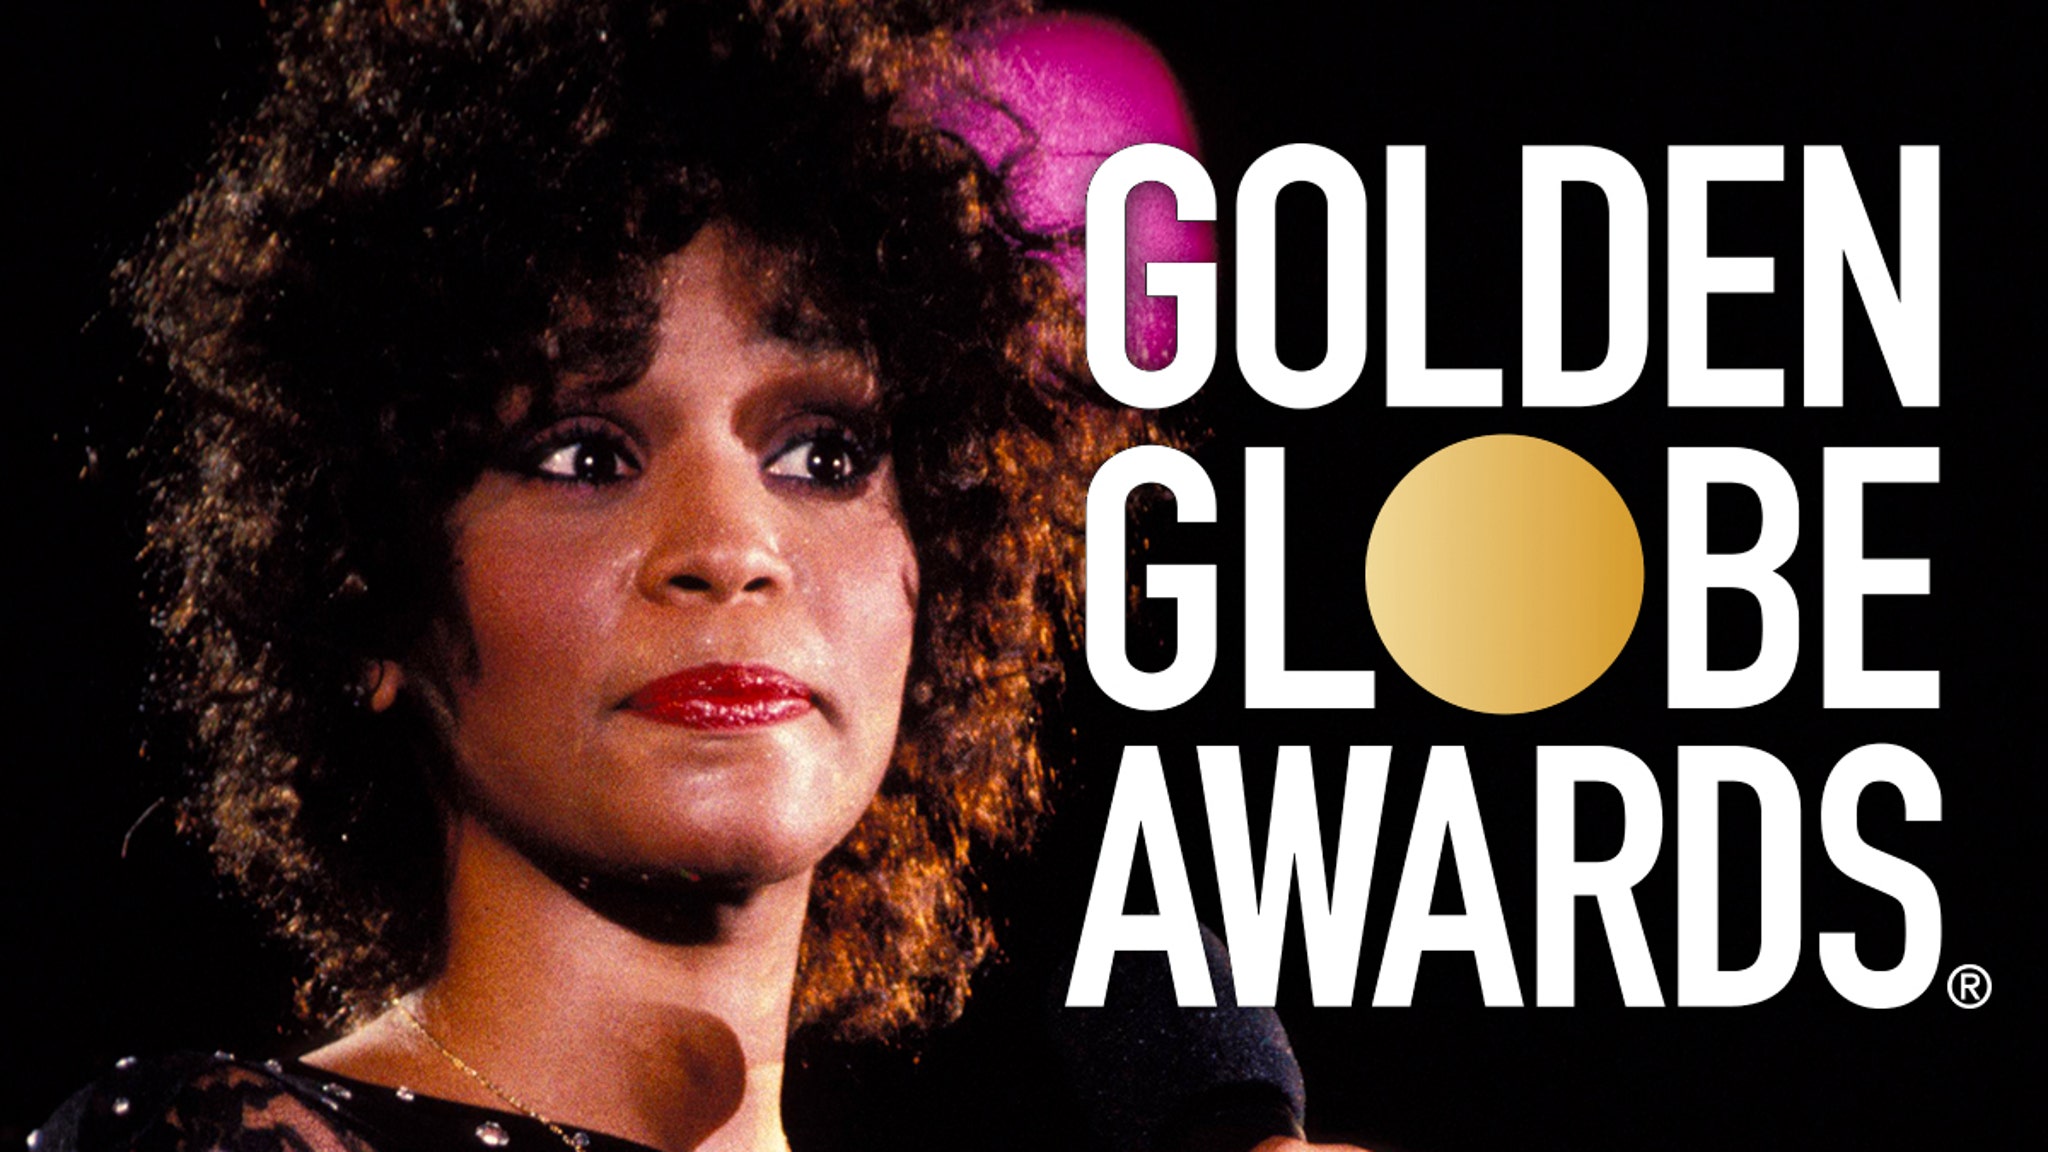 Whitney Houston Estate disappointed by Golden Globes death joke